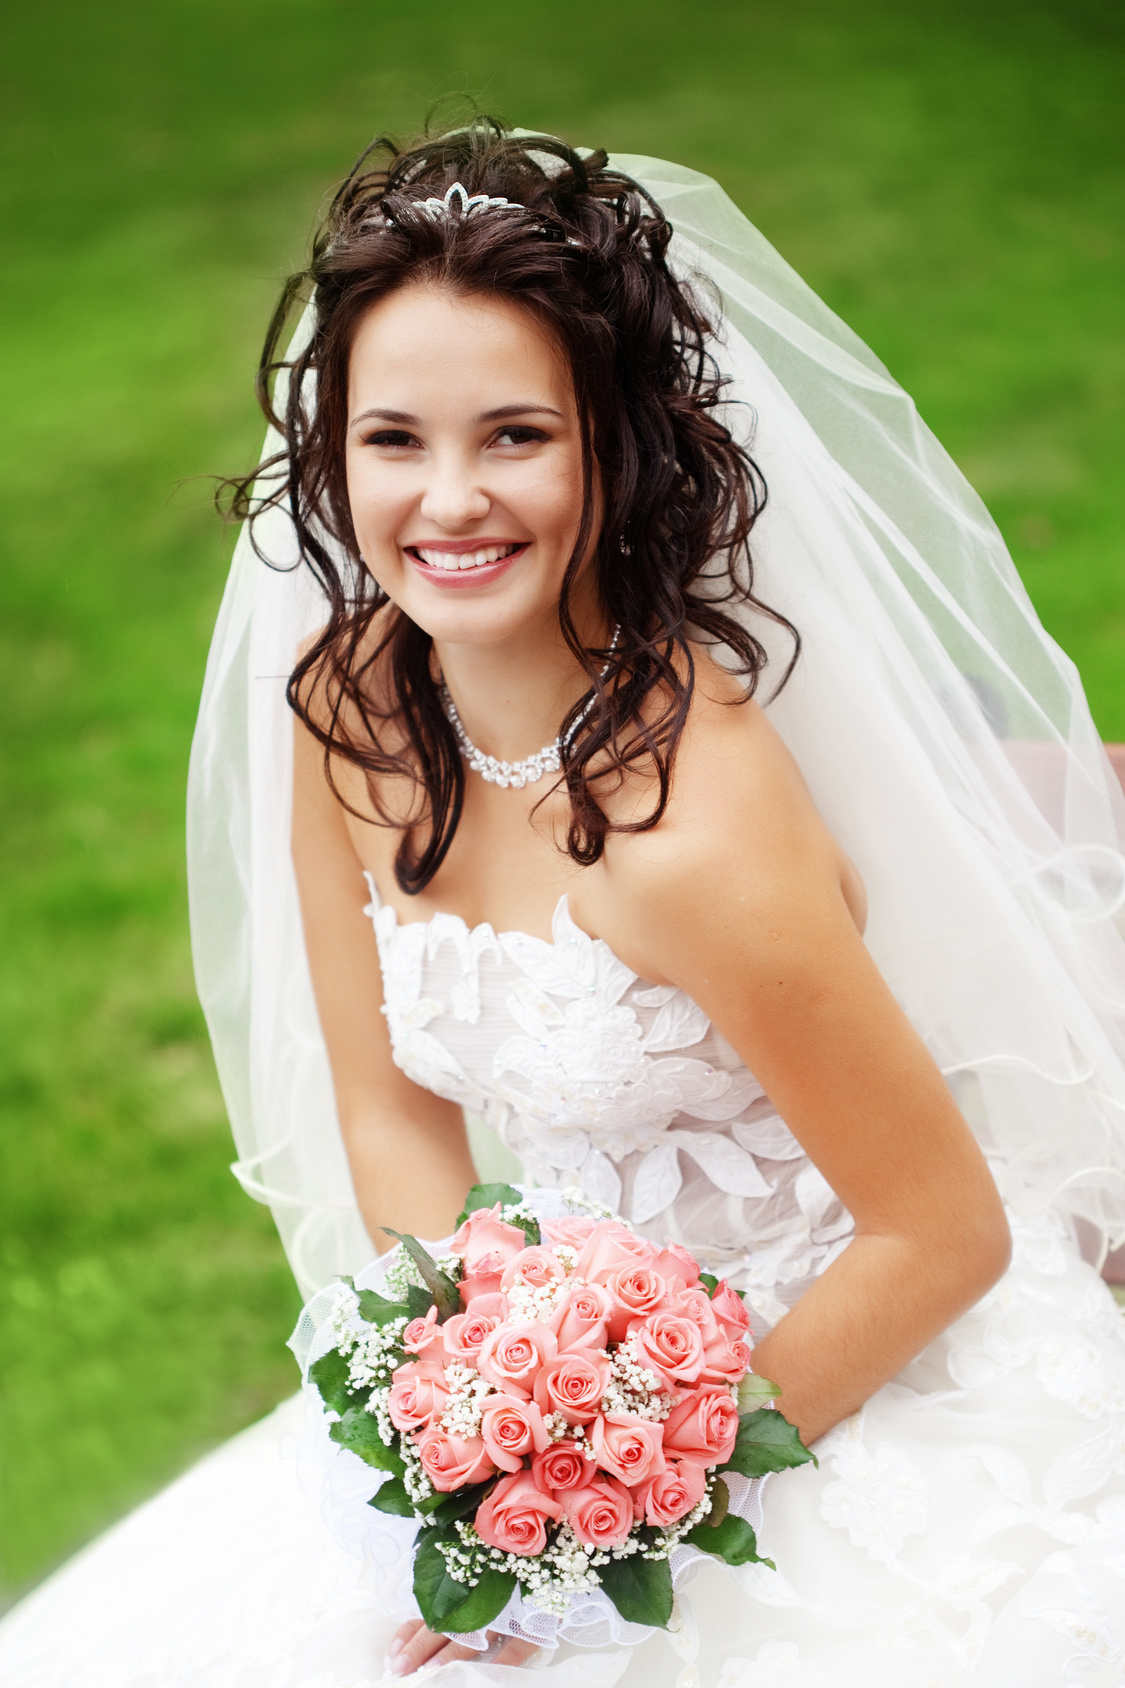 Amazing Bride Pictures & Backgrounds